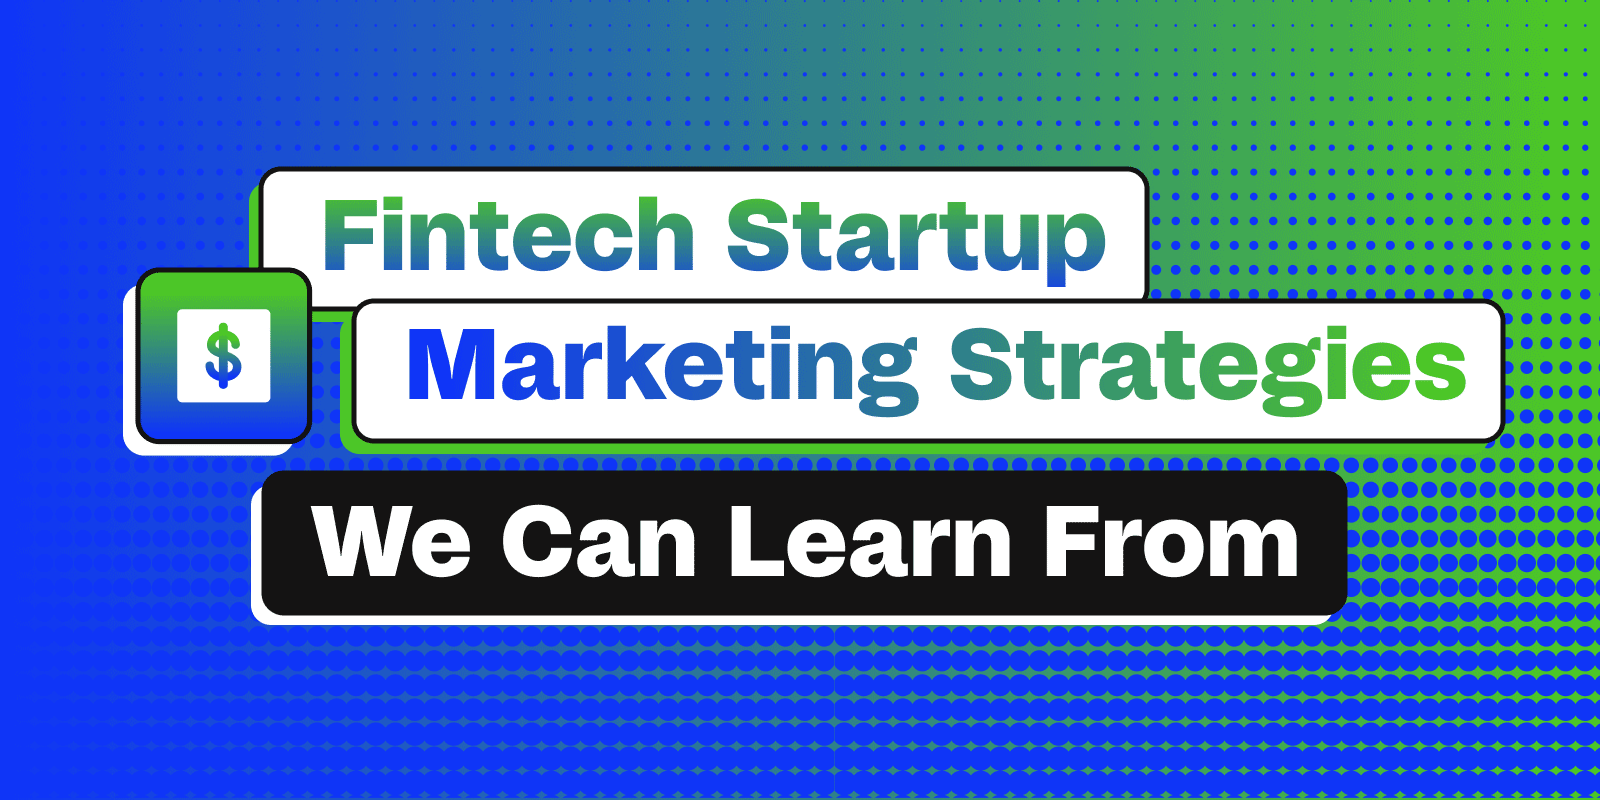 5 Fintech Marketing Startup Strategies We Can Learn From